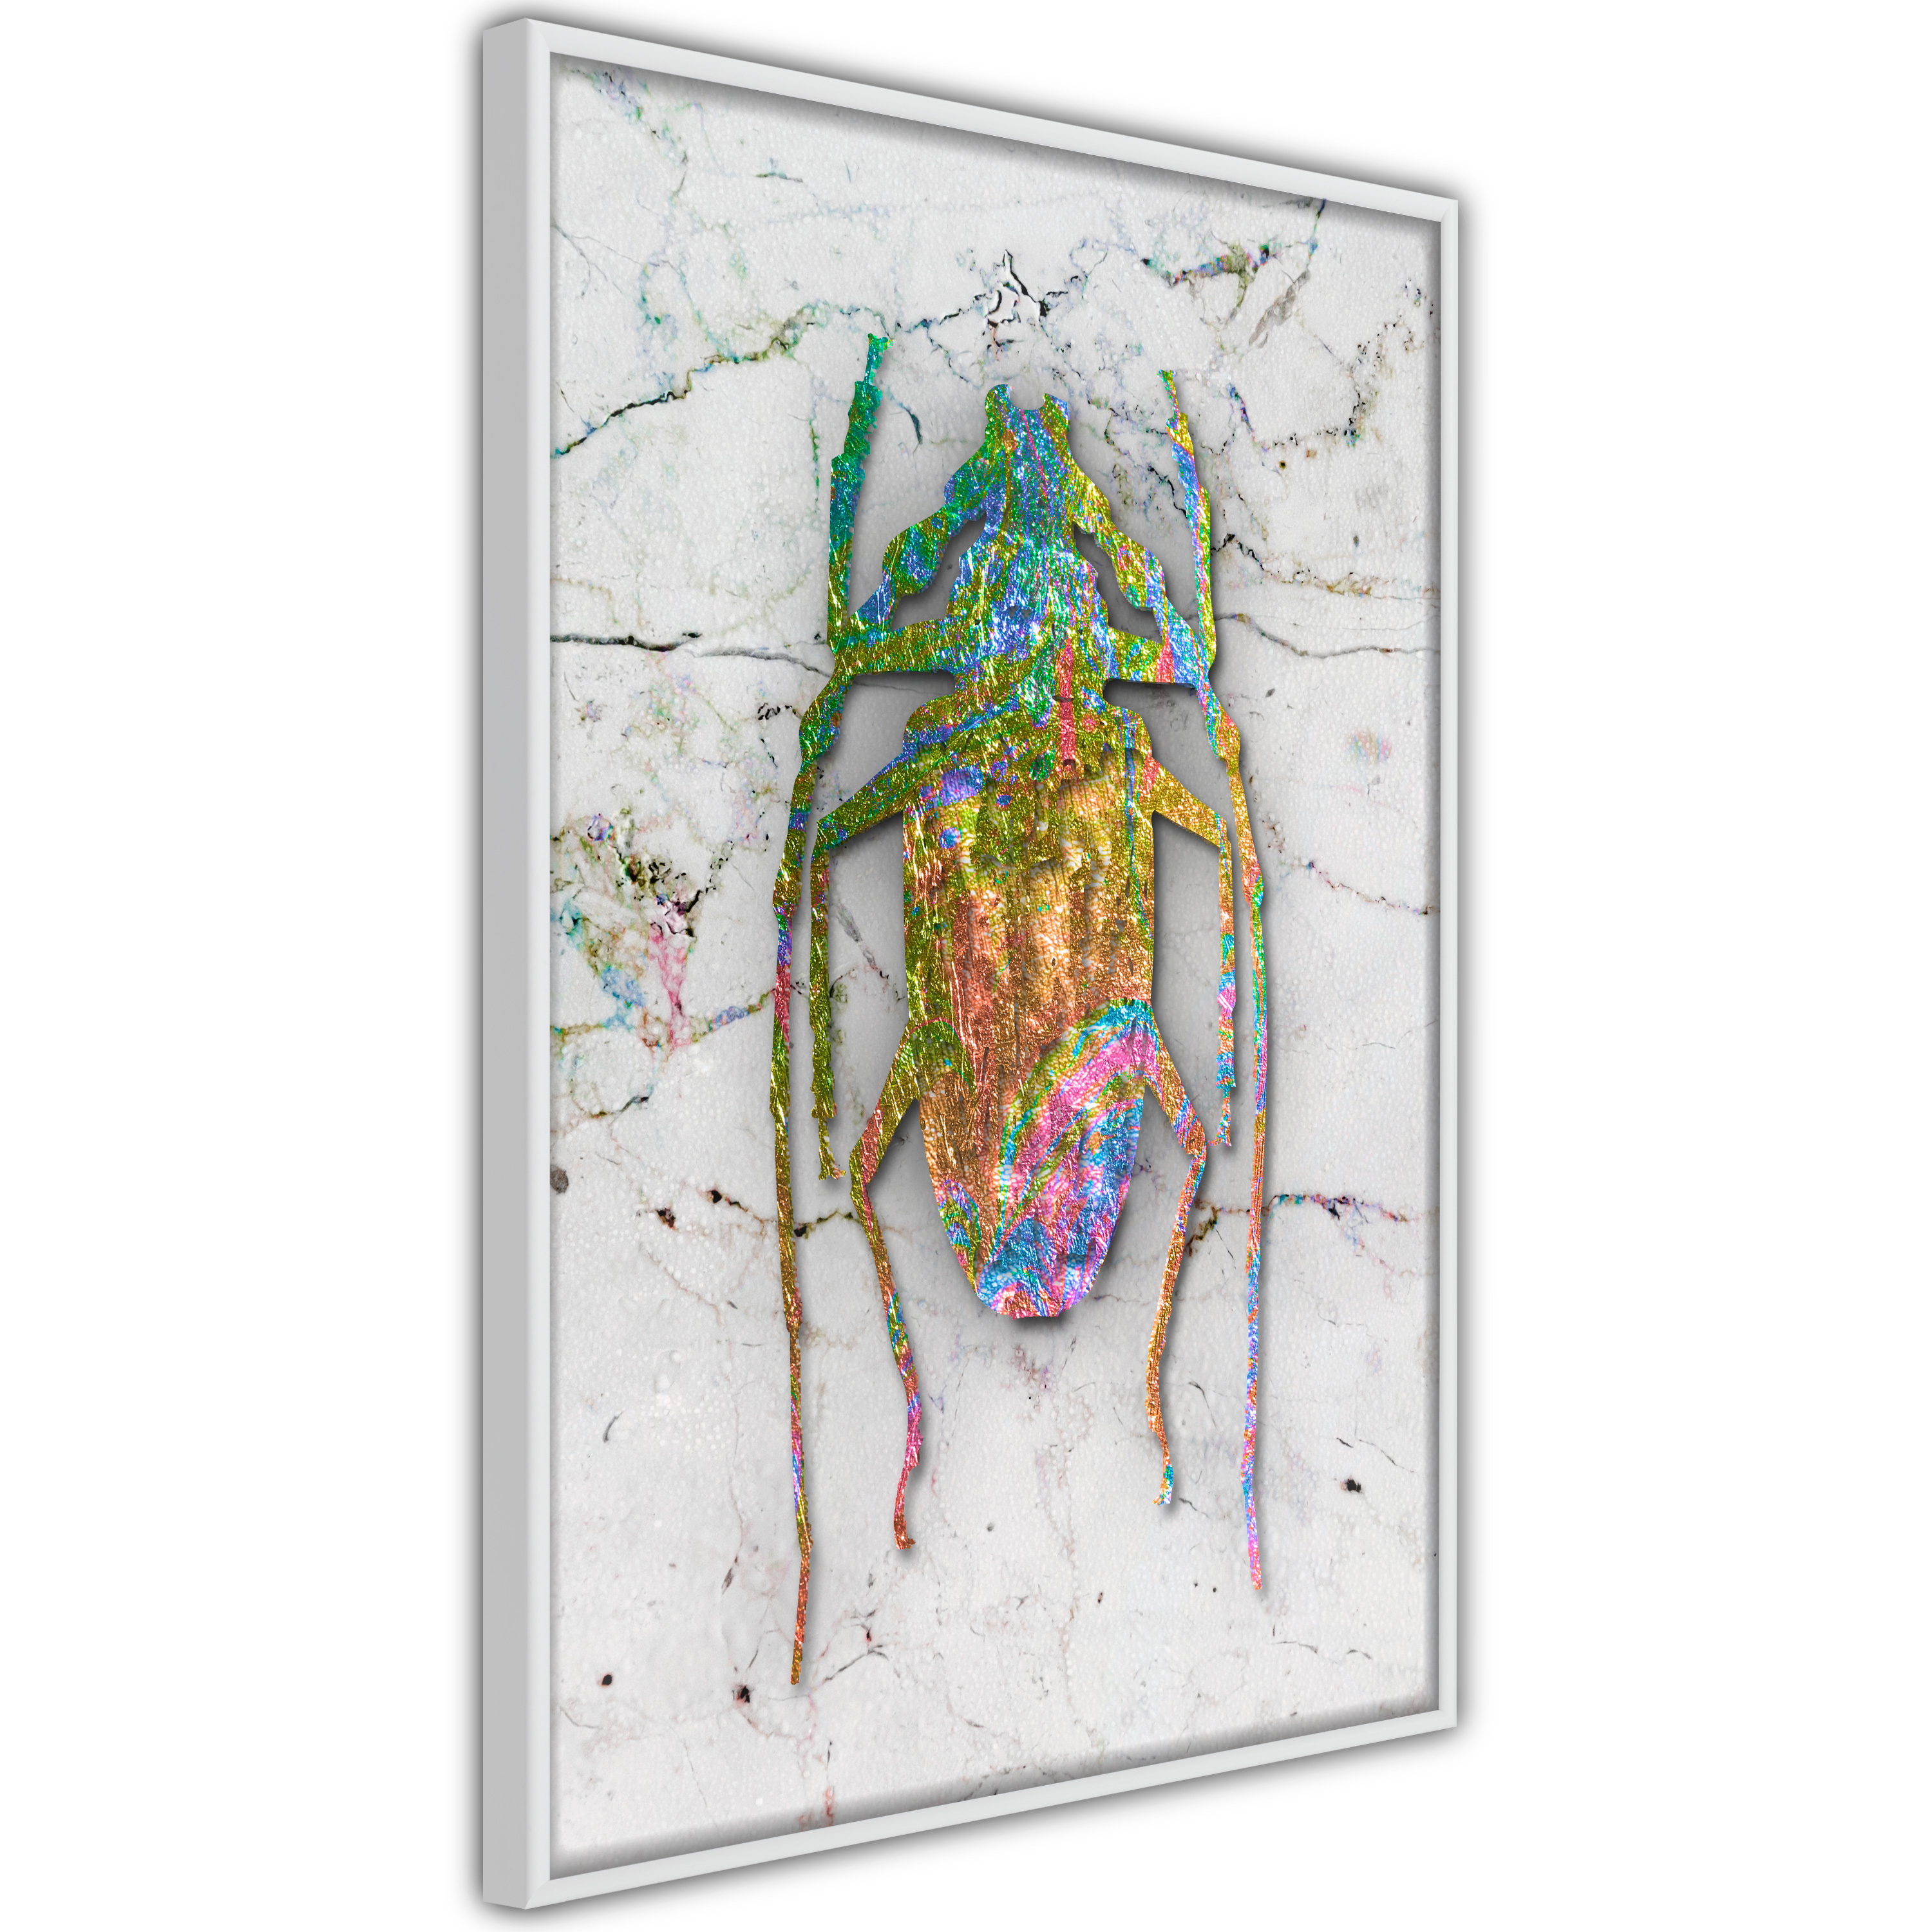 Poster - Iridescent Insect - 20x30